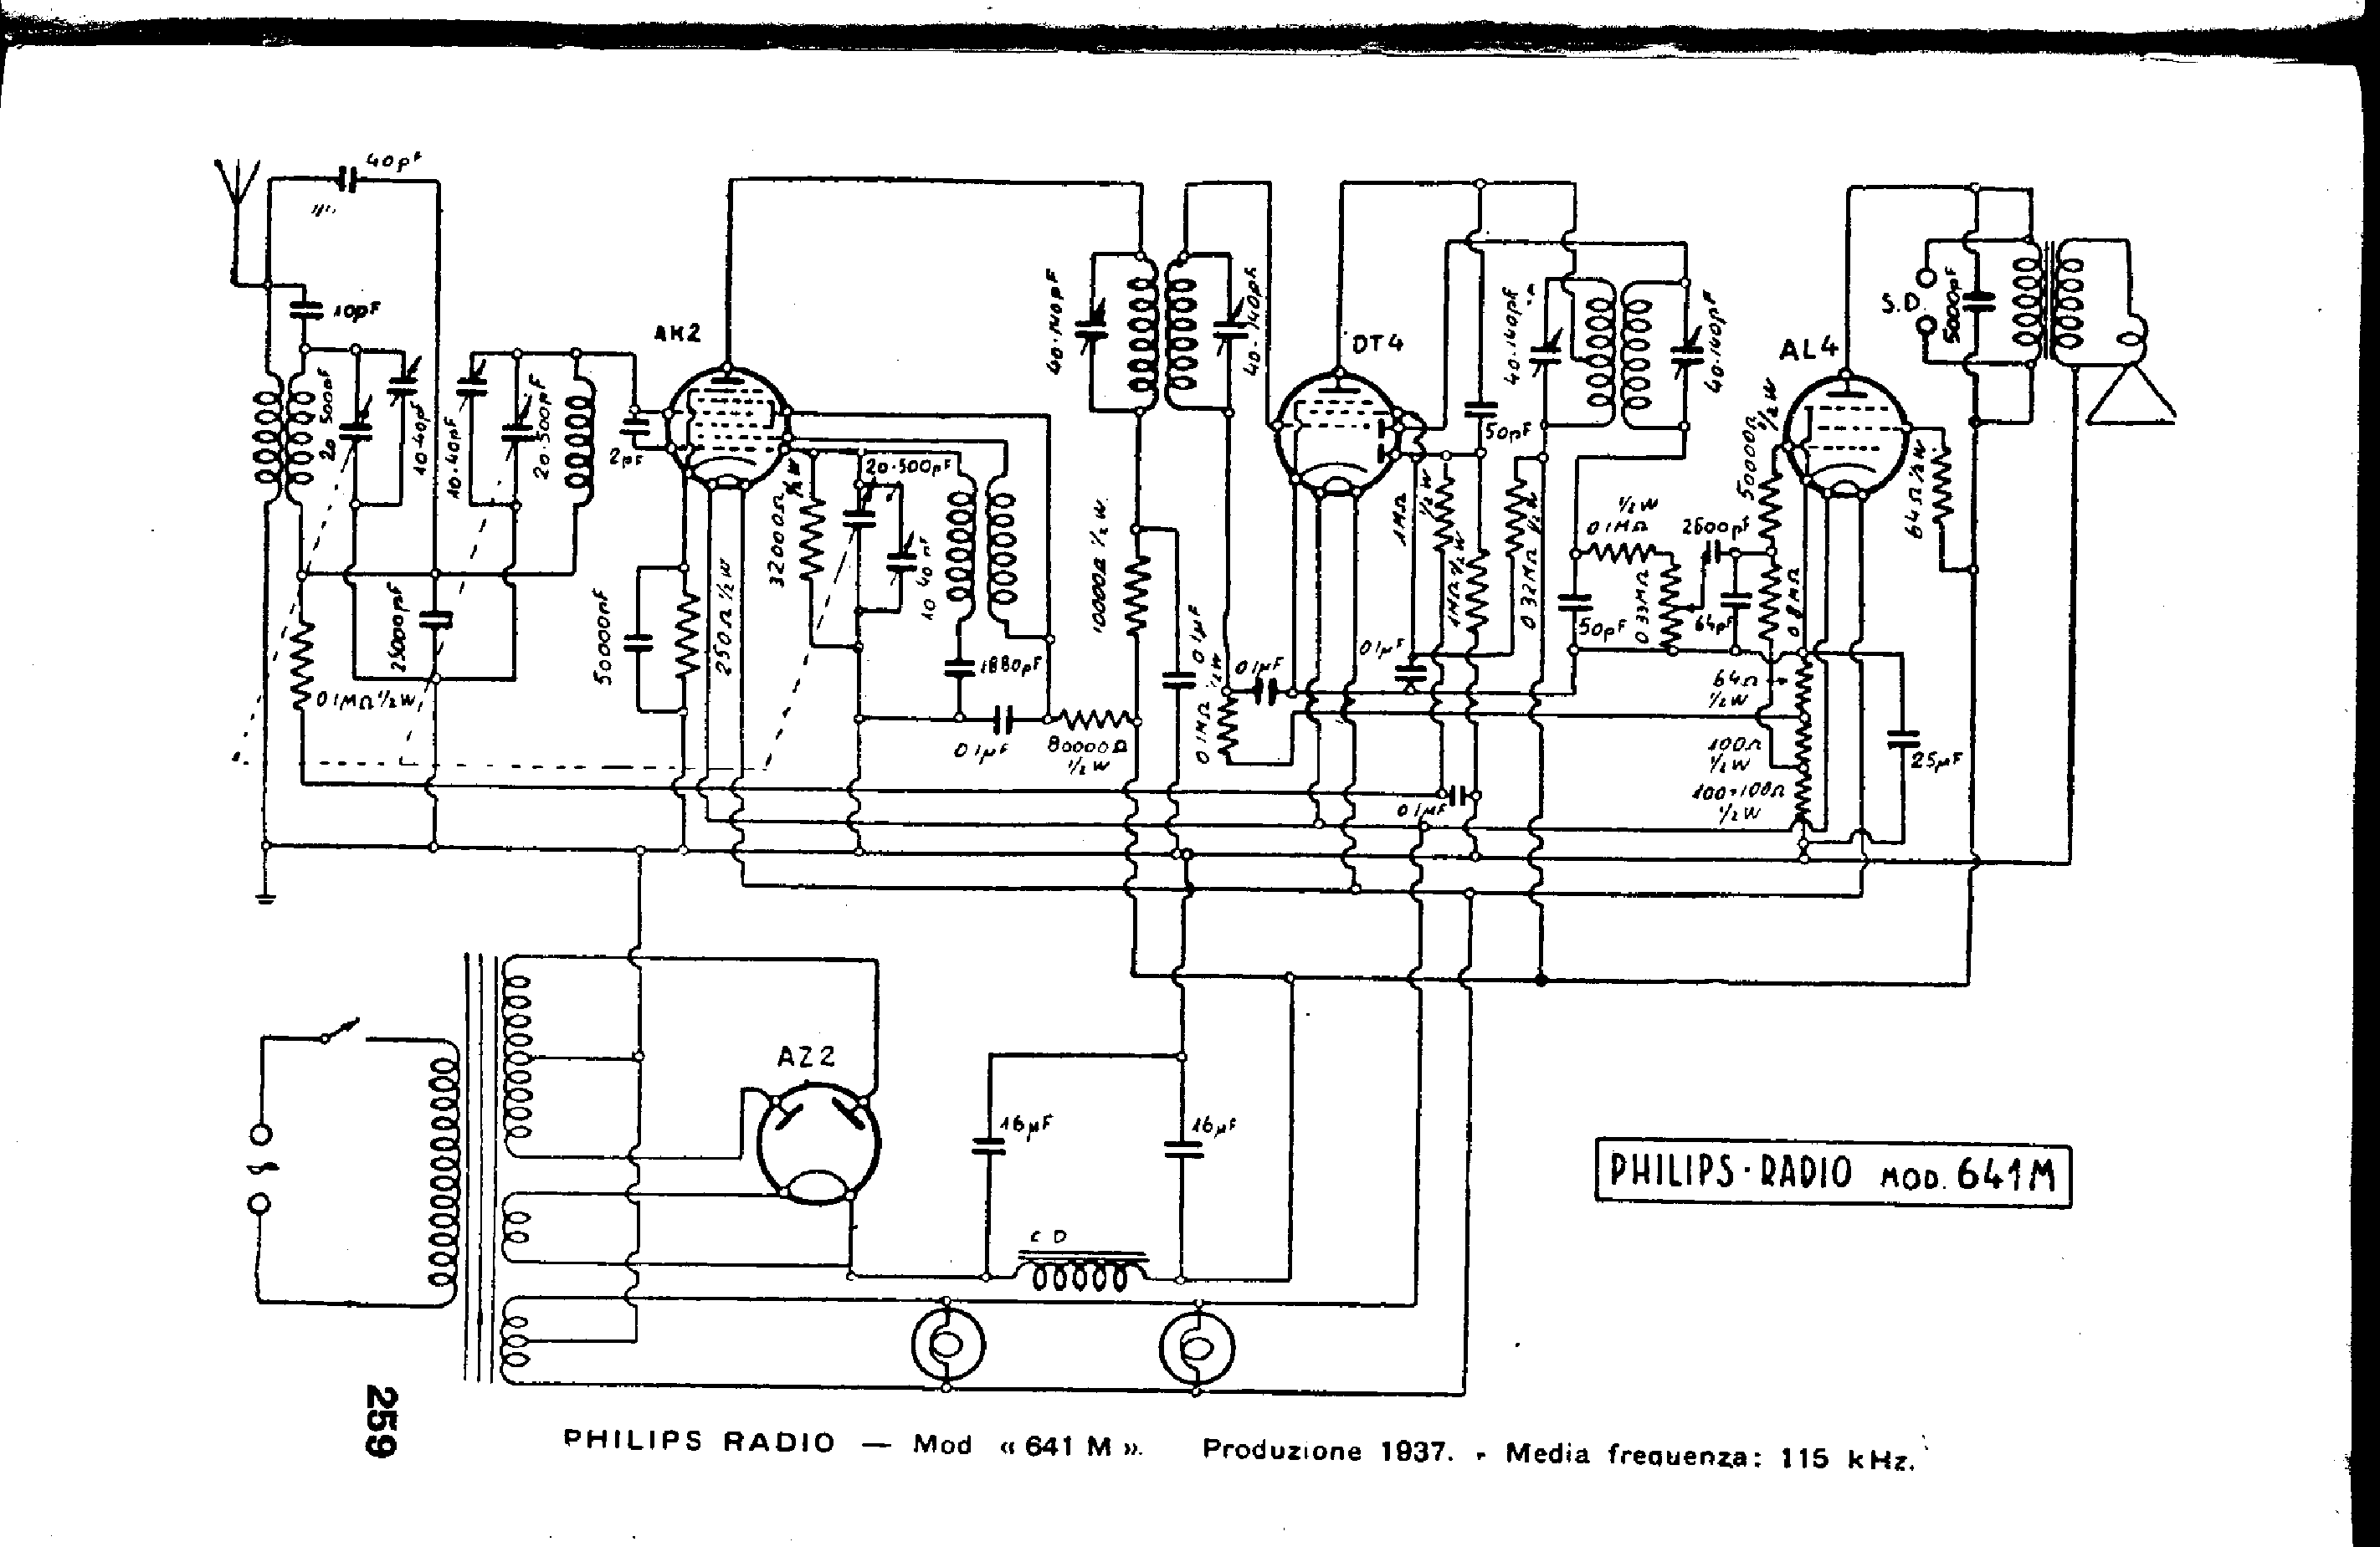 PHILIPS 641M service manual (1st page)